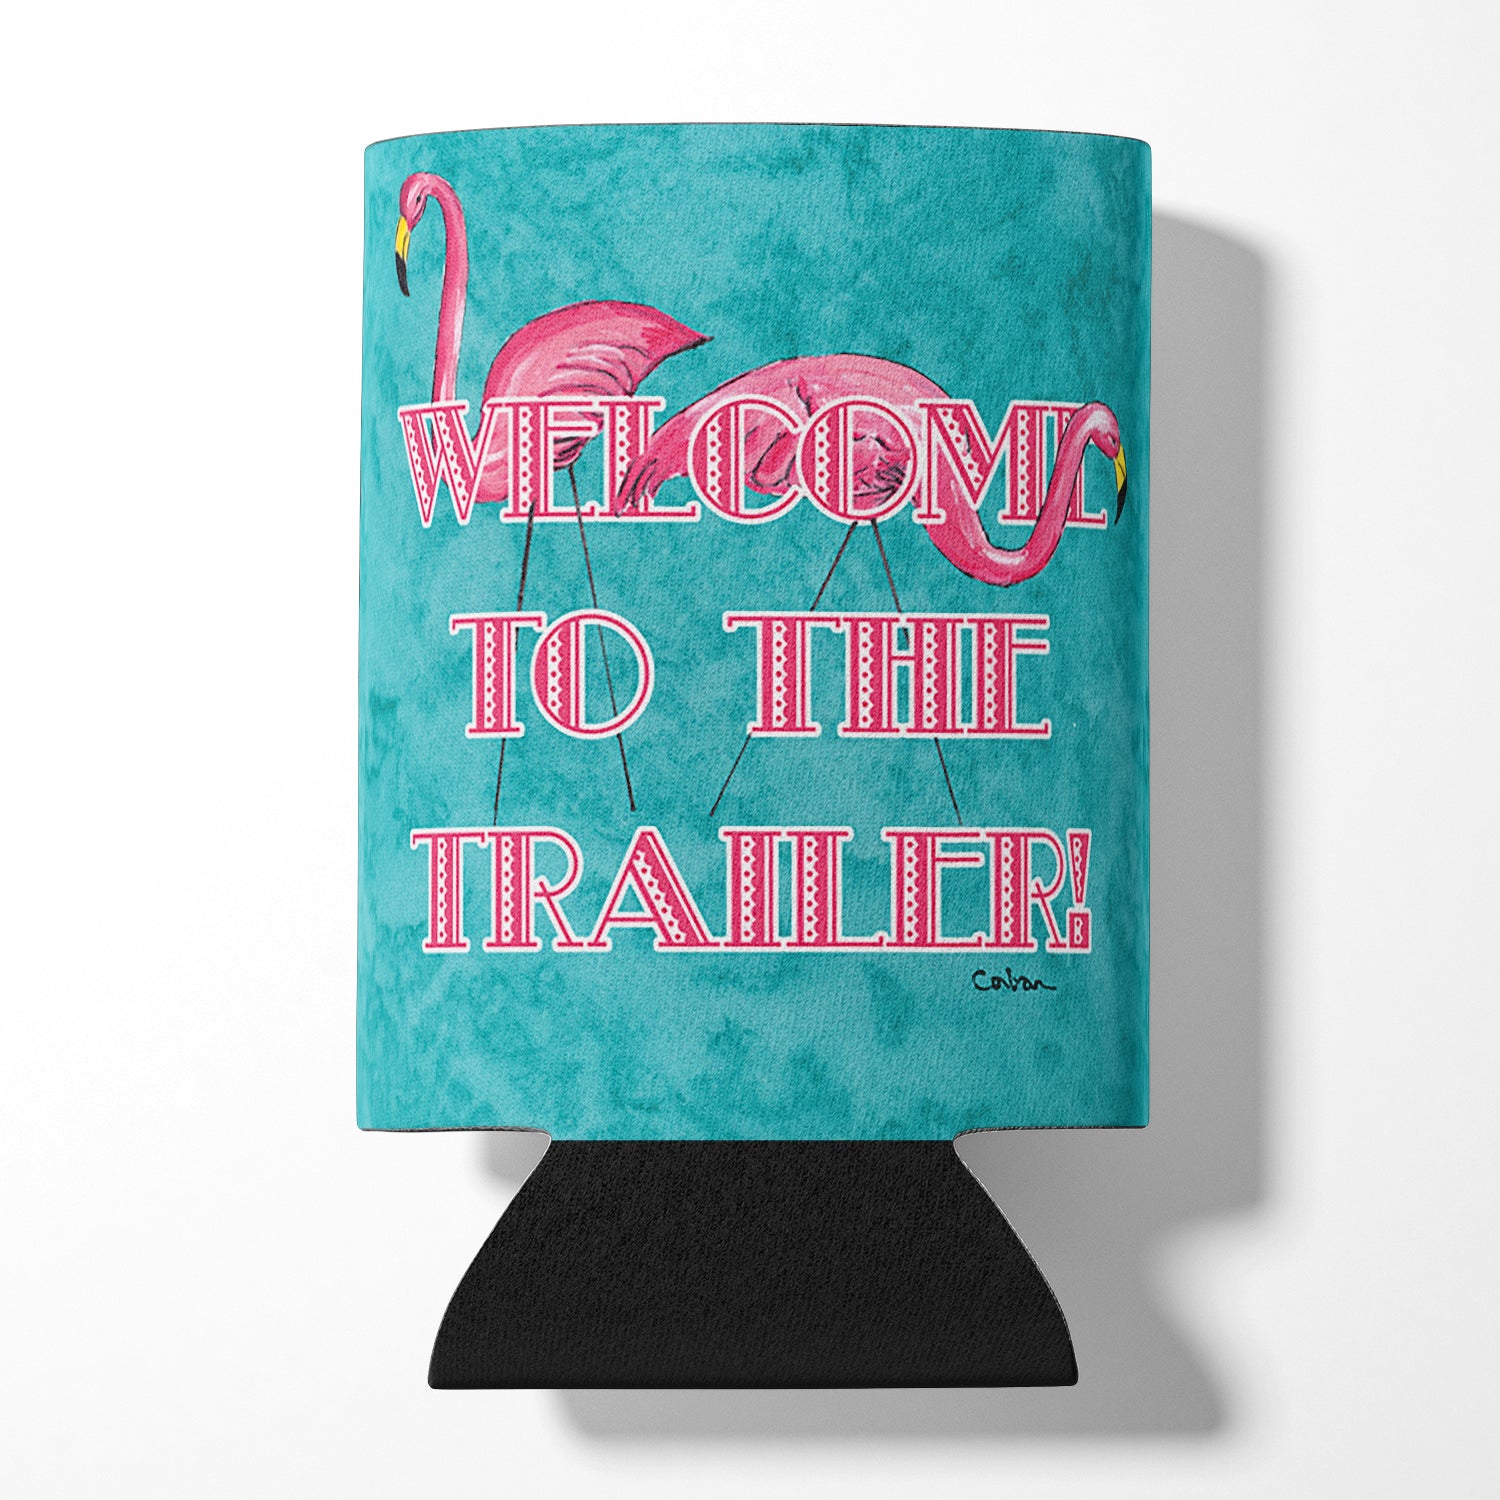 Welcome to the trailer Can or Bottle Beverage Insulator Hugger